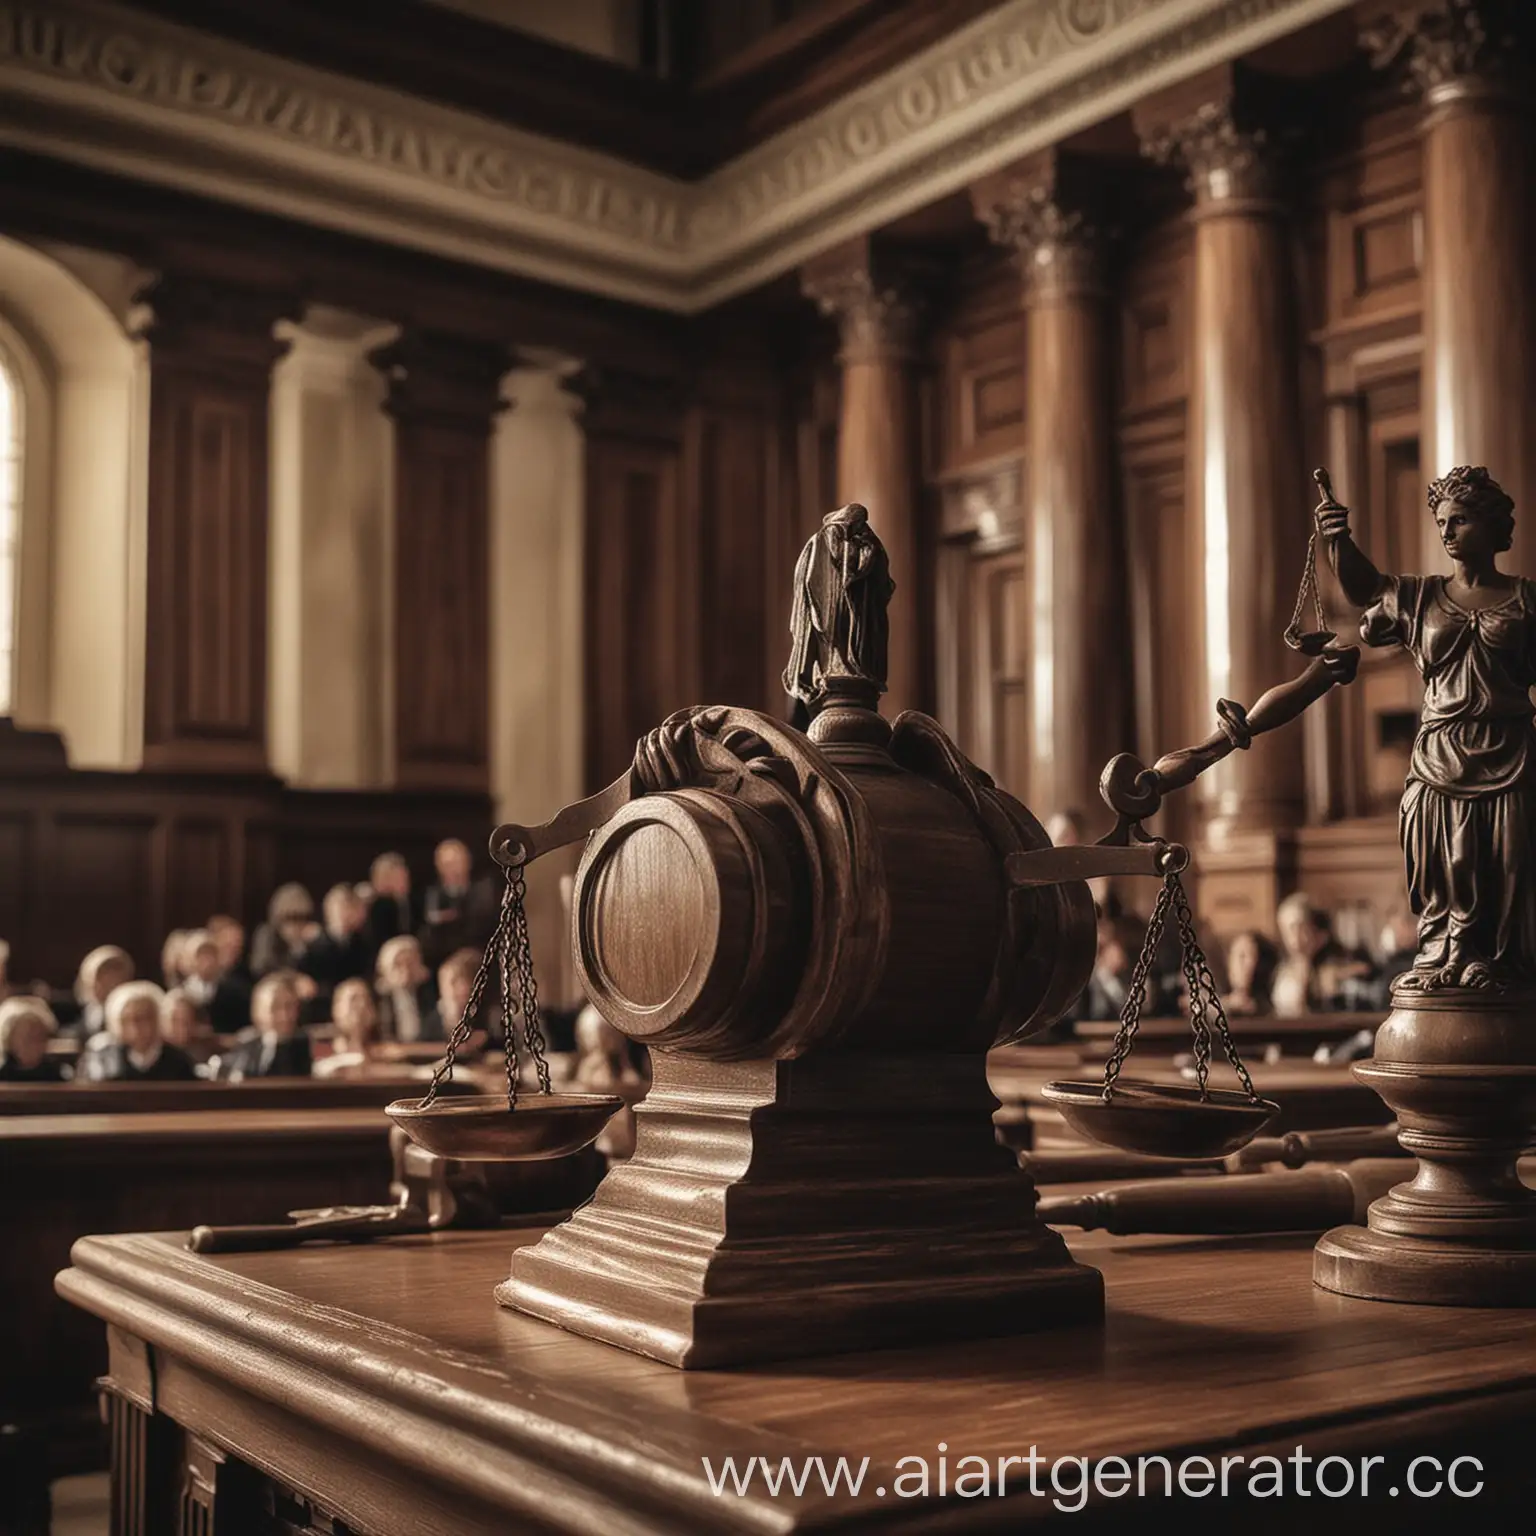 Judicial proceedings - the activity of courts in considering and resolving civil, criminal, and administrative cases, as well as in executing judicial decisions.